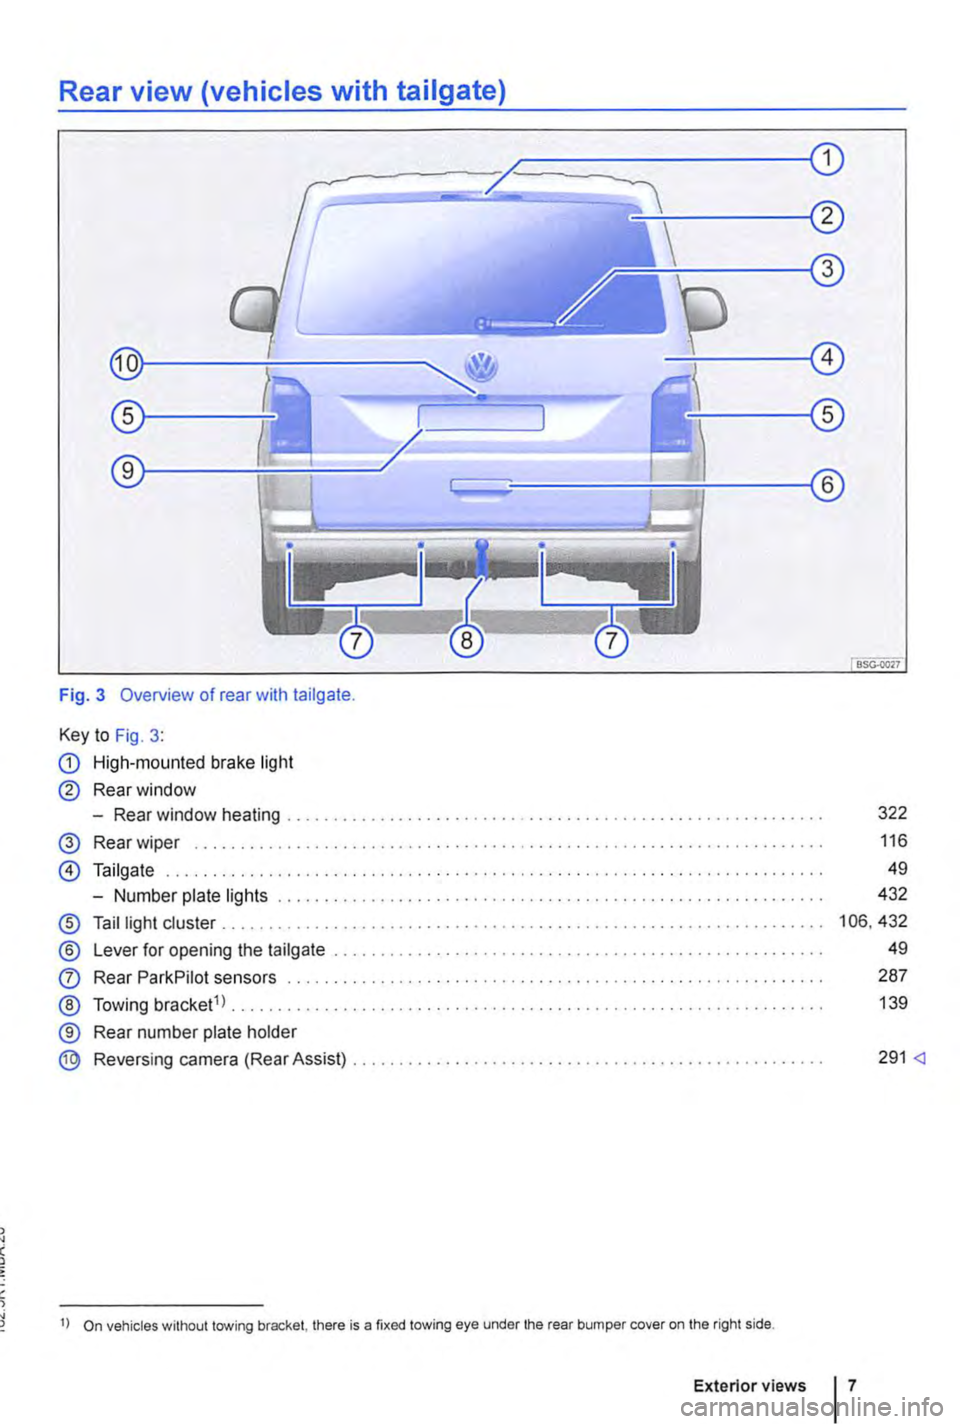 VOLKSWAGEN TRANSPORTER 2021  Owners Manual Rear view (vehicles with tailgate) 
Fig. 3 Overview of rear with tailgate. 
Key to Fig. 3: 
CD High-mounted brake light 
@ Rear window 
-Rear window heating ........................ . 
@ Rear wiper ..